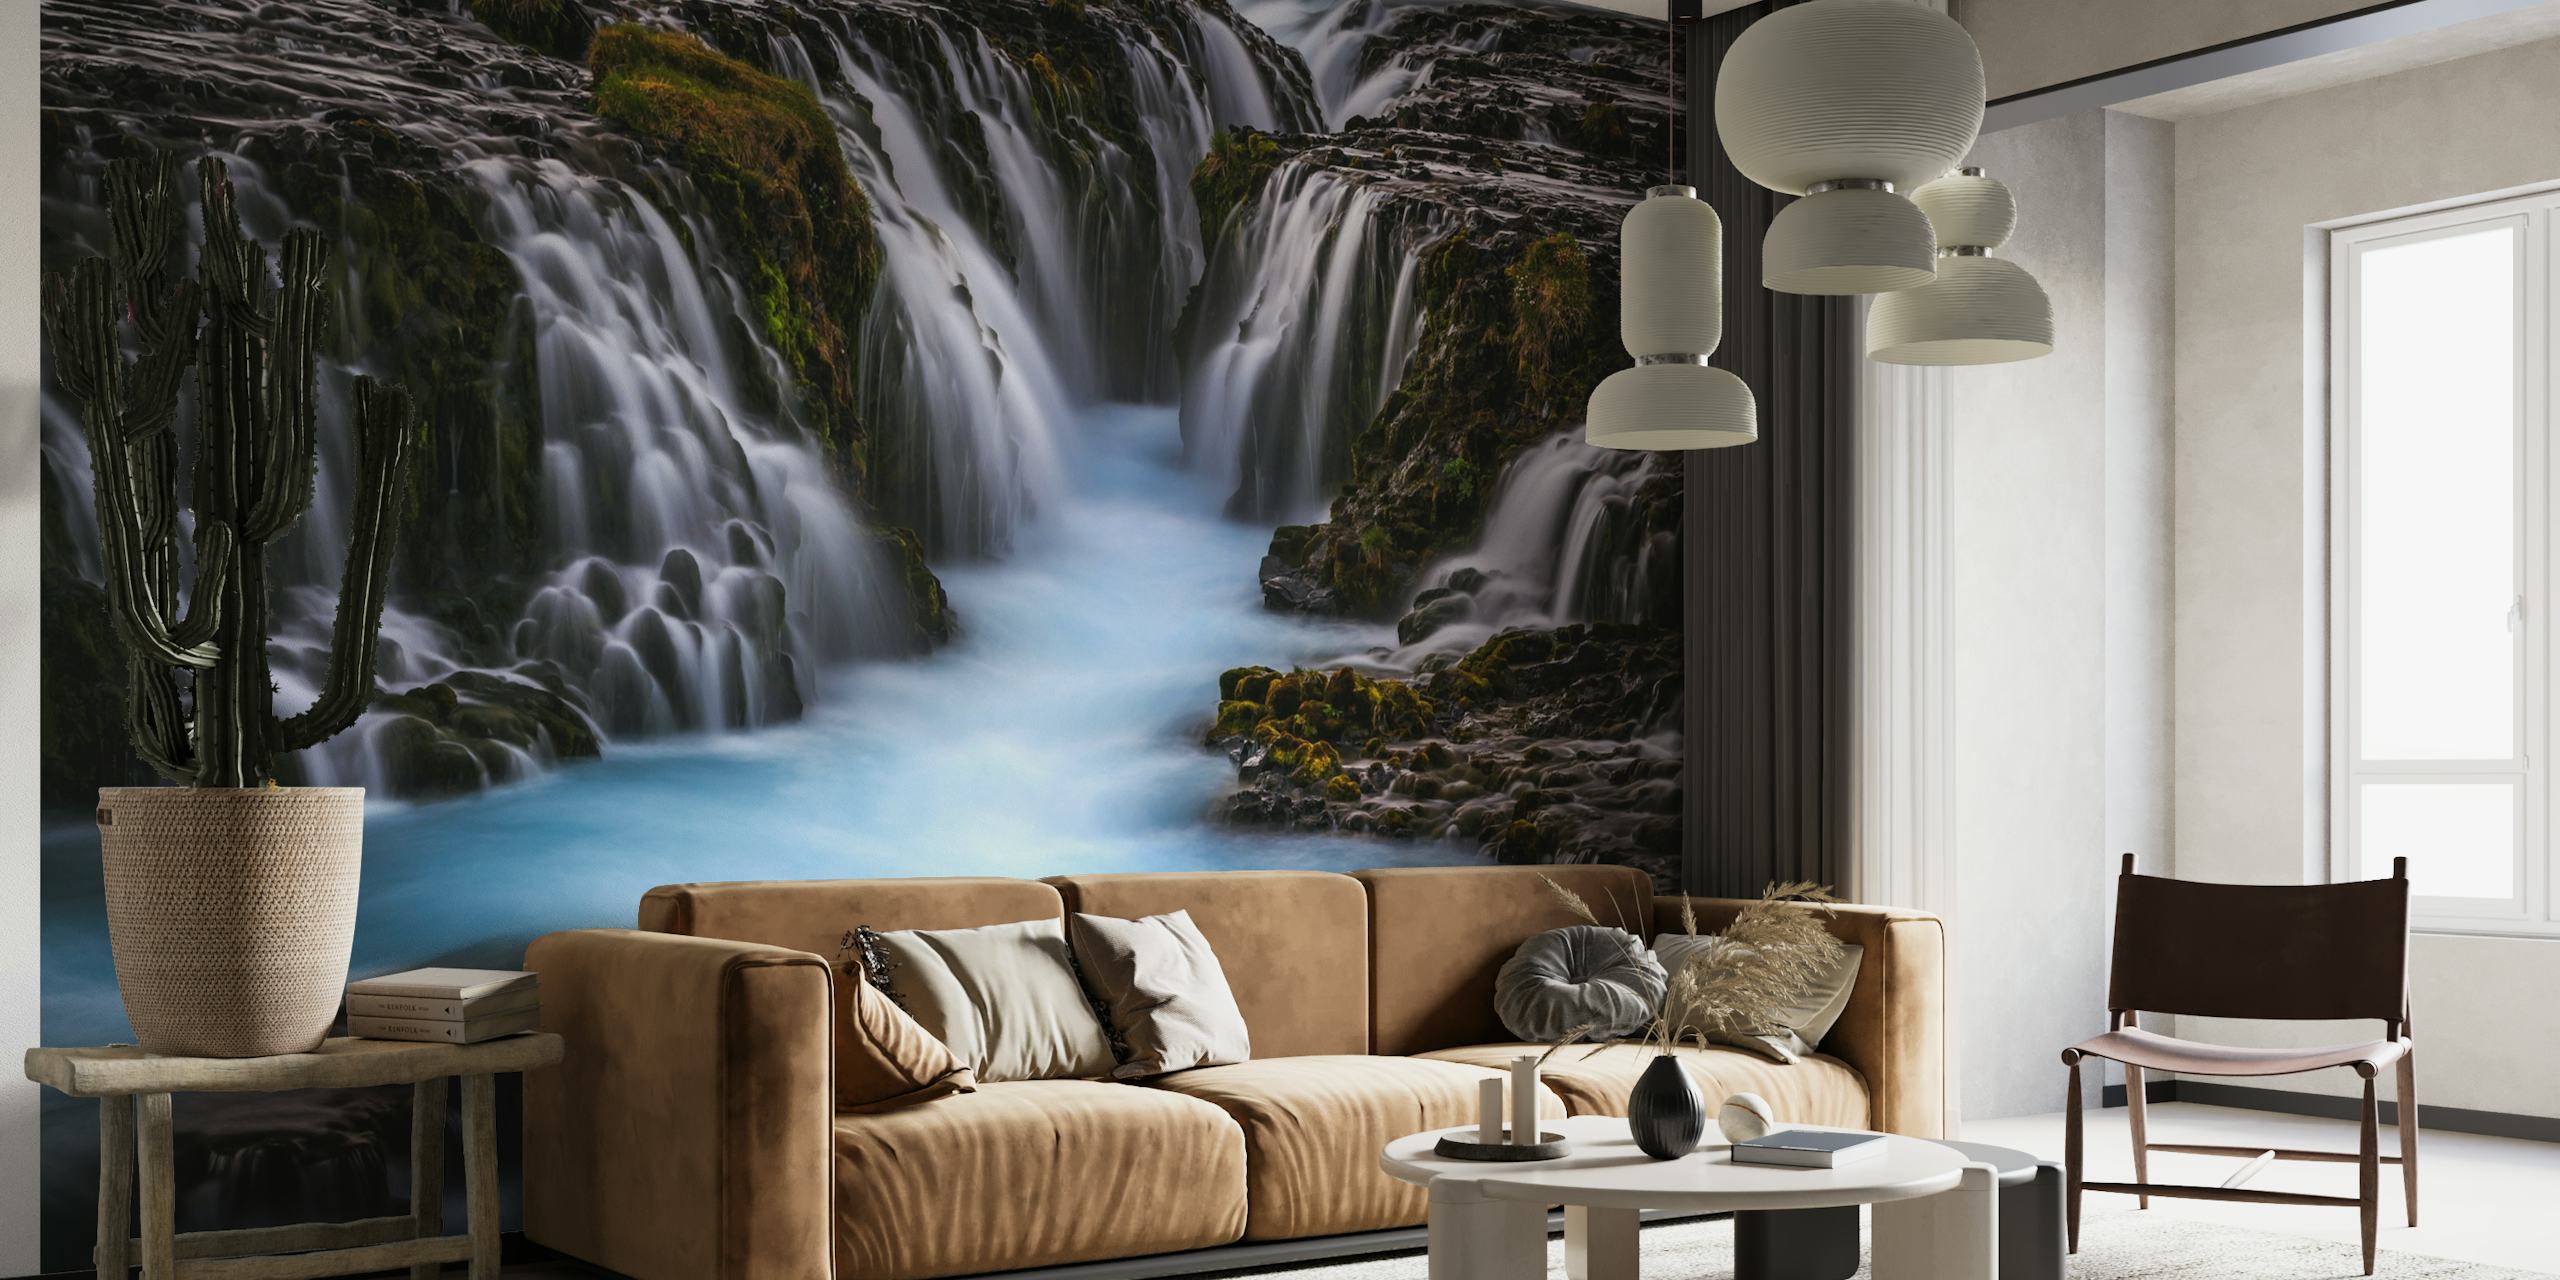 The Blue Beauty wall mural featuring a serene waterfall with deep blue waters and rocky surroundings